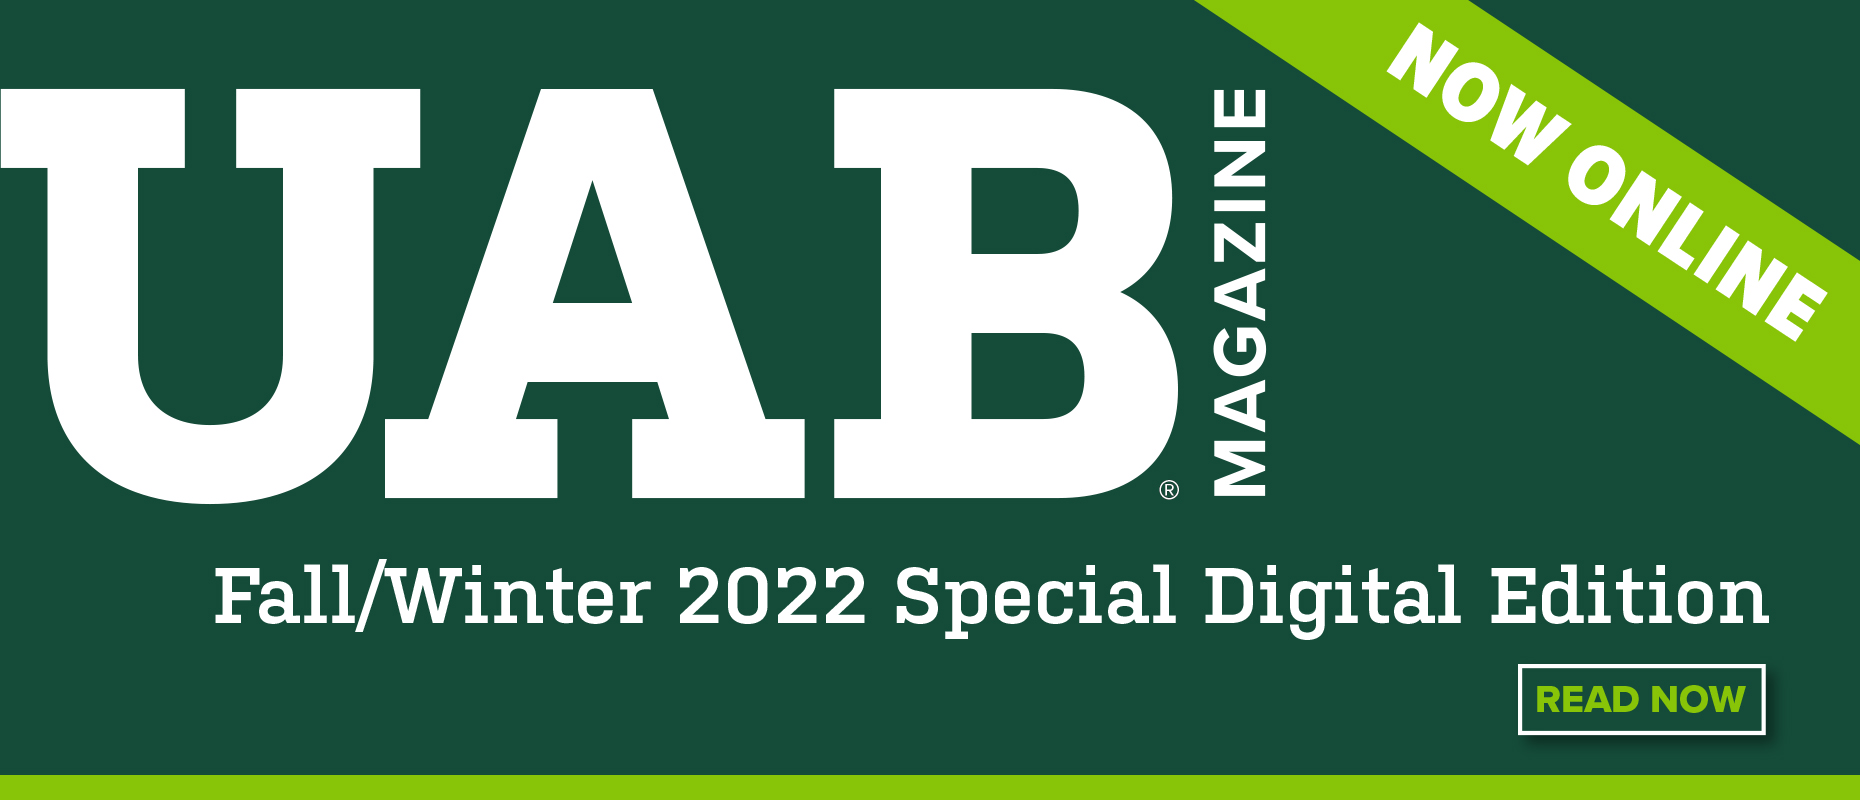 UAB Magazine now online. Fall/Winter 2022 Special Digital Edition. Read now.